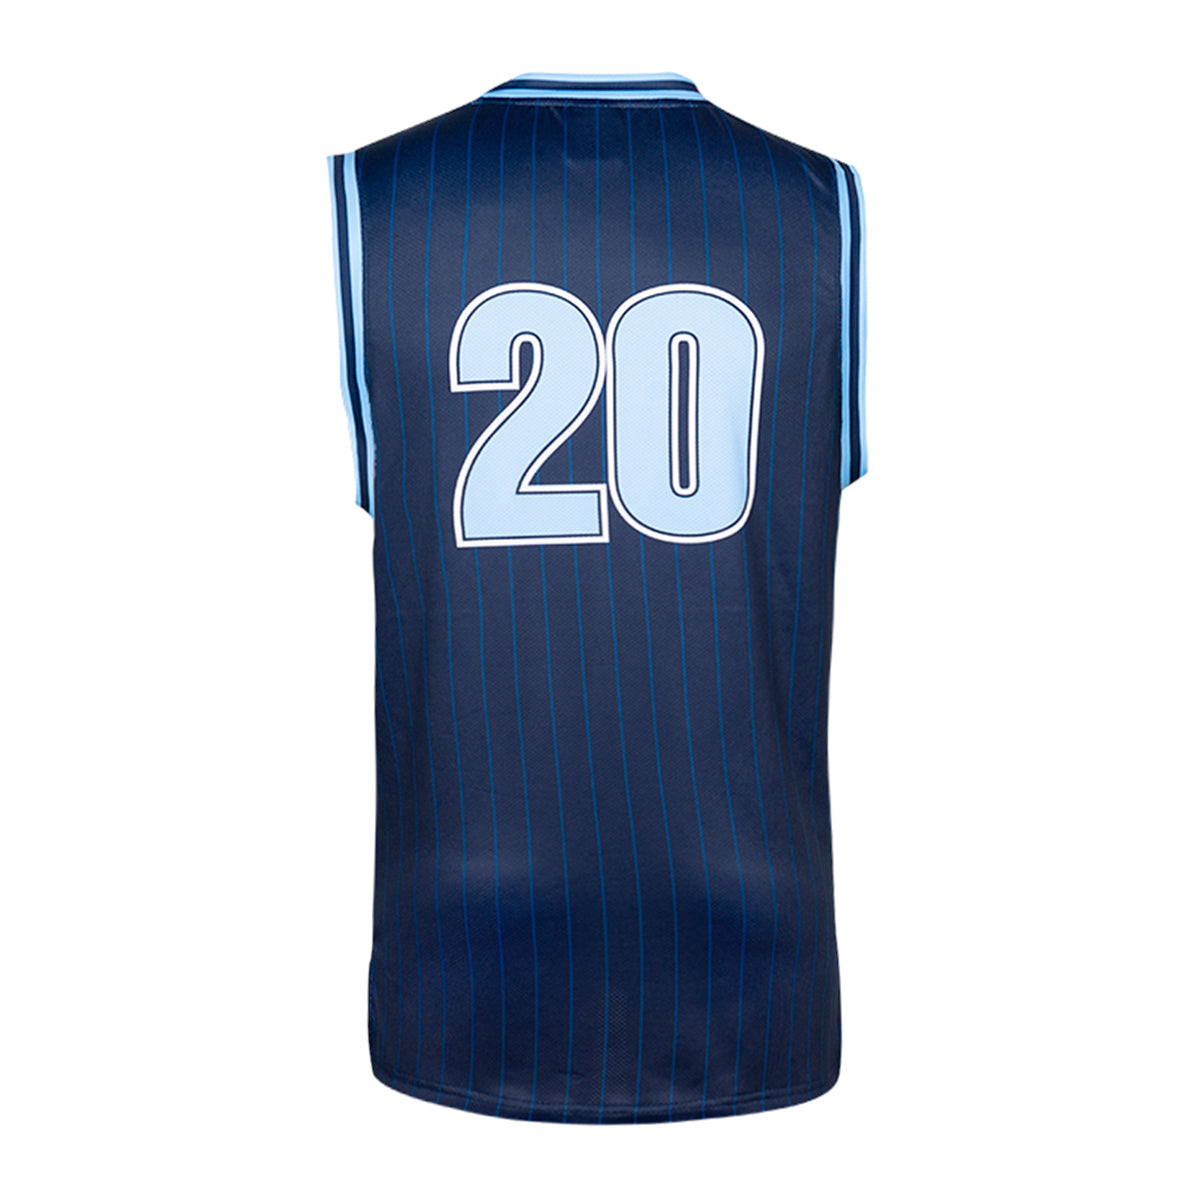 2020 Northland Rugby Mens Basketball Singlet